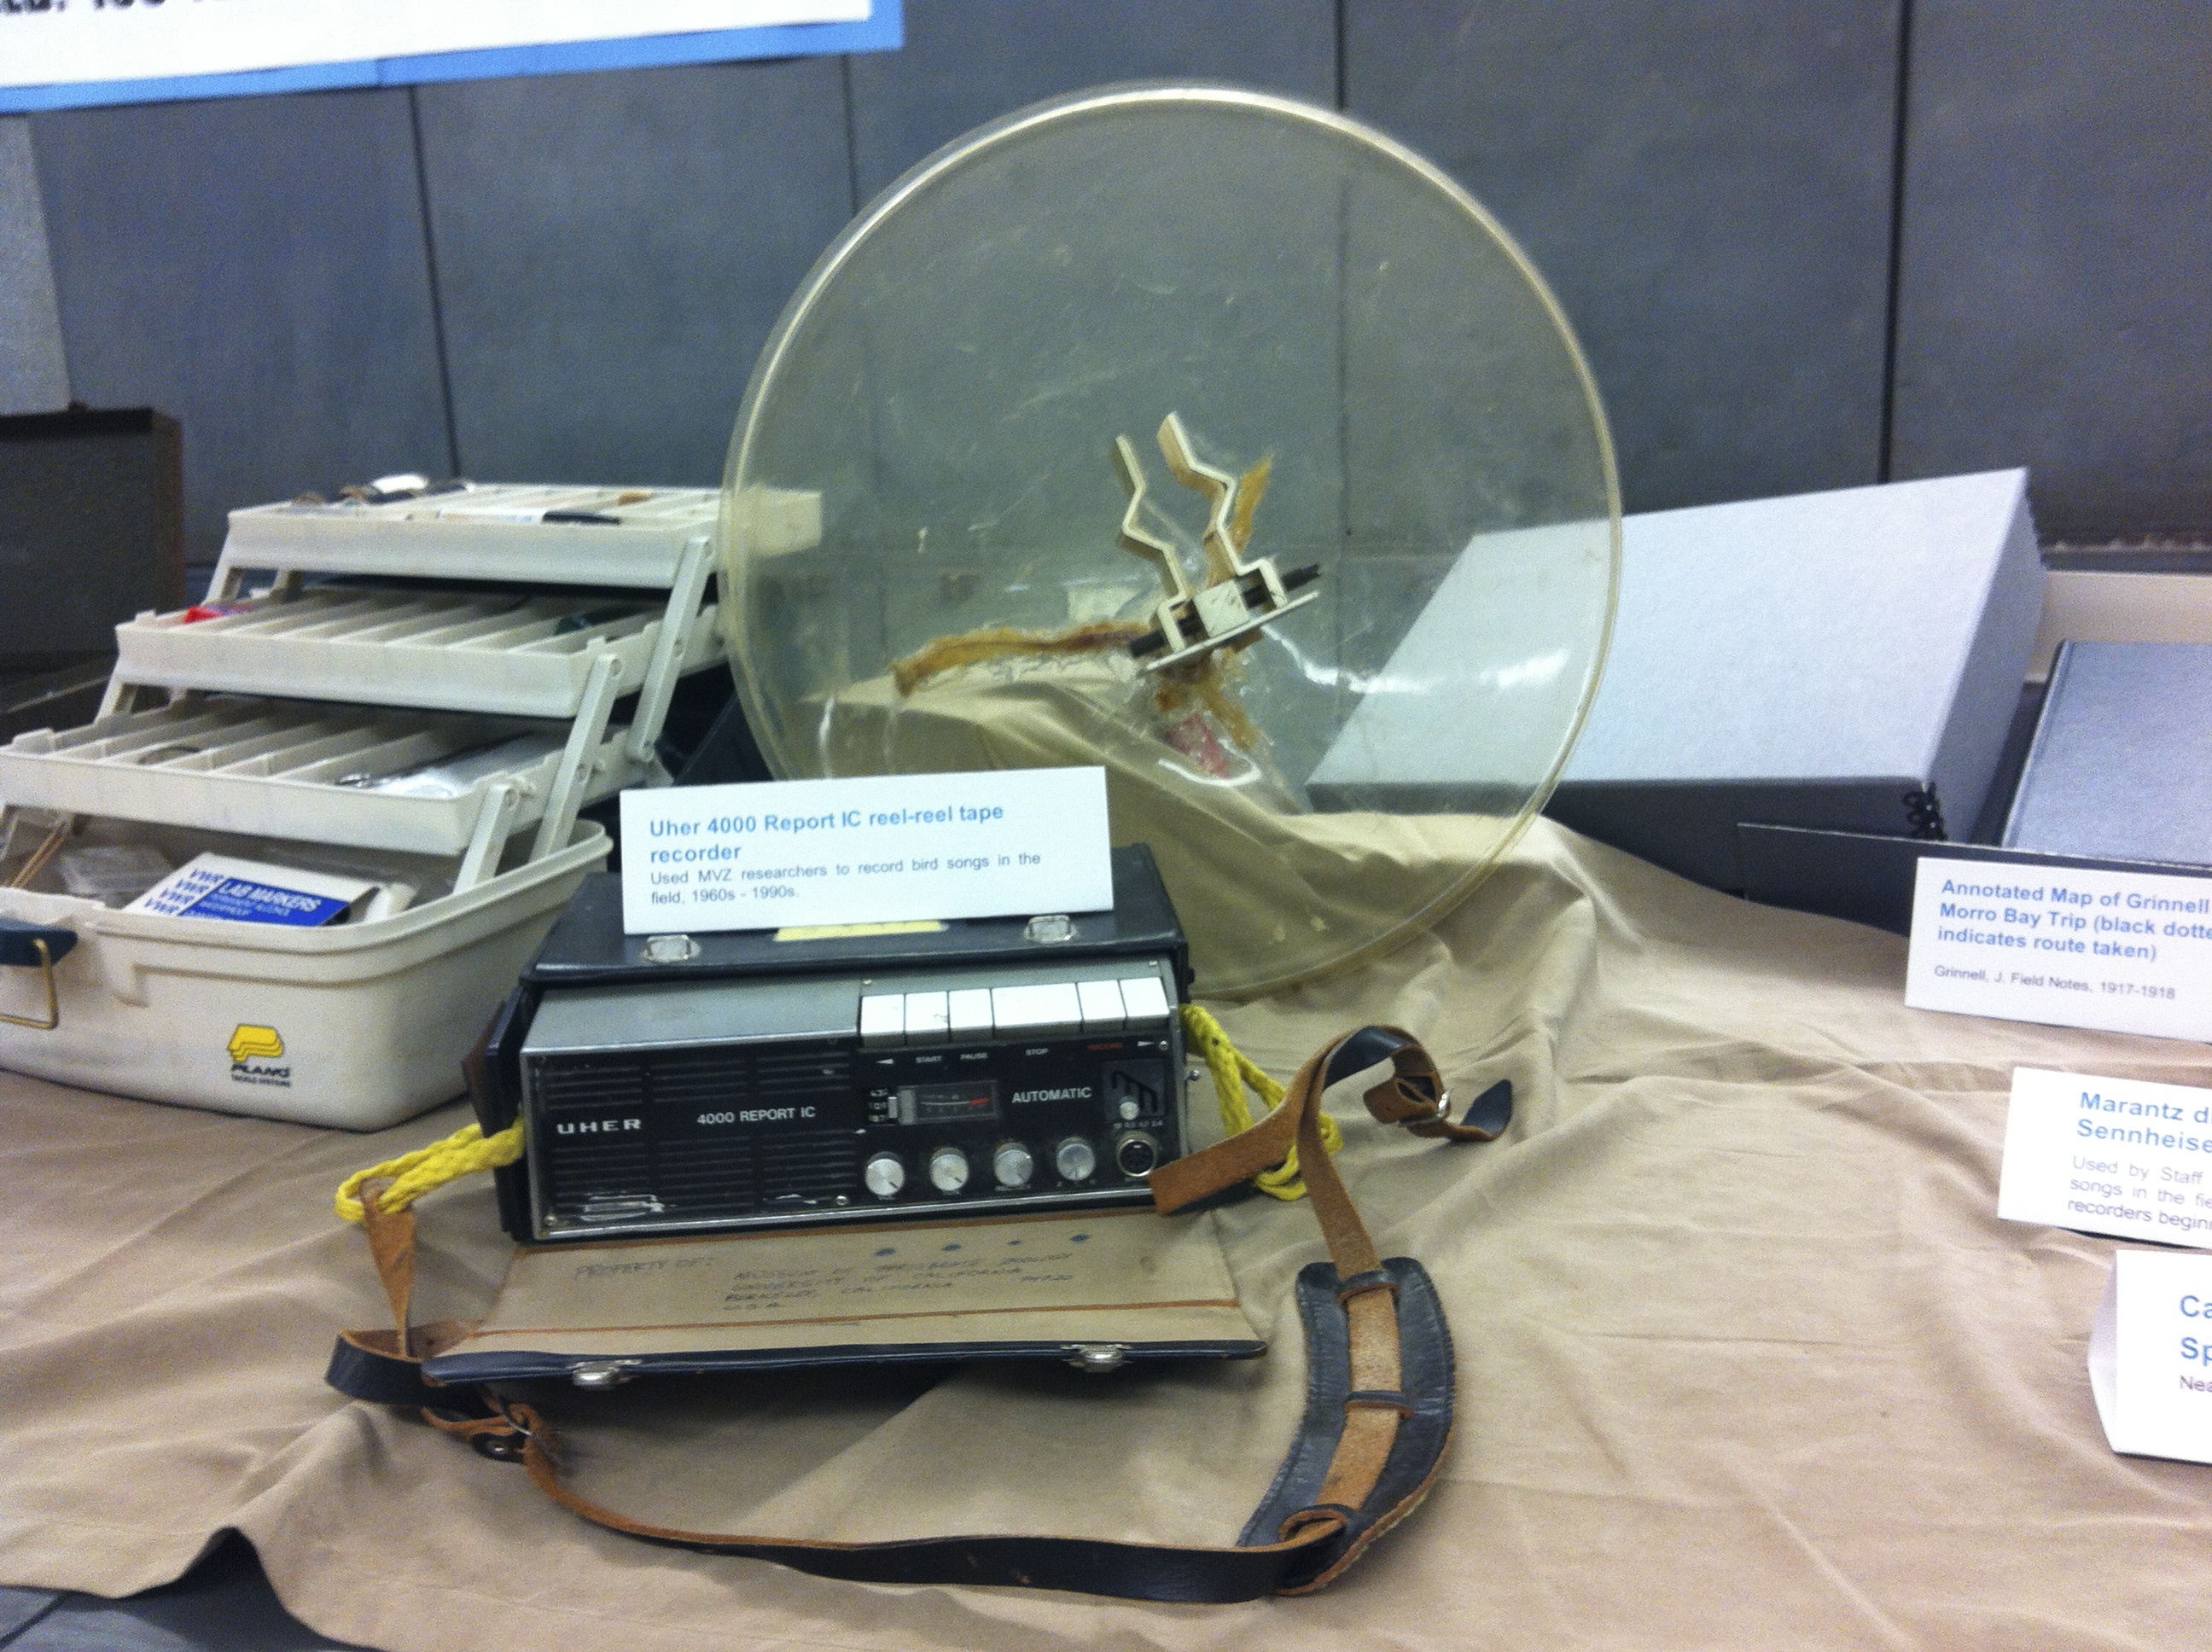 A Uher 4000 Report IC reel-reel tape recorder, used by MVZ researchers to record bird songs in the field from the 1960s to the 1990s.